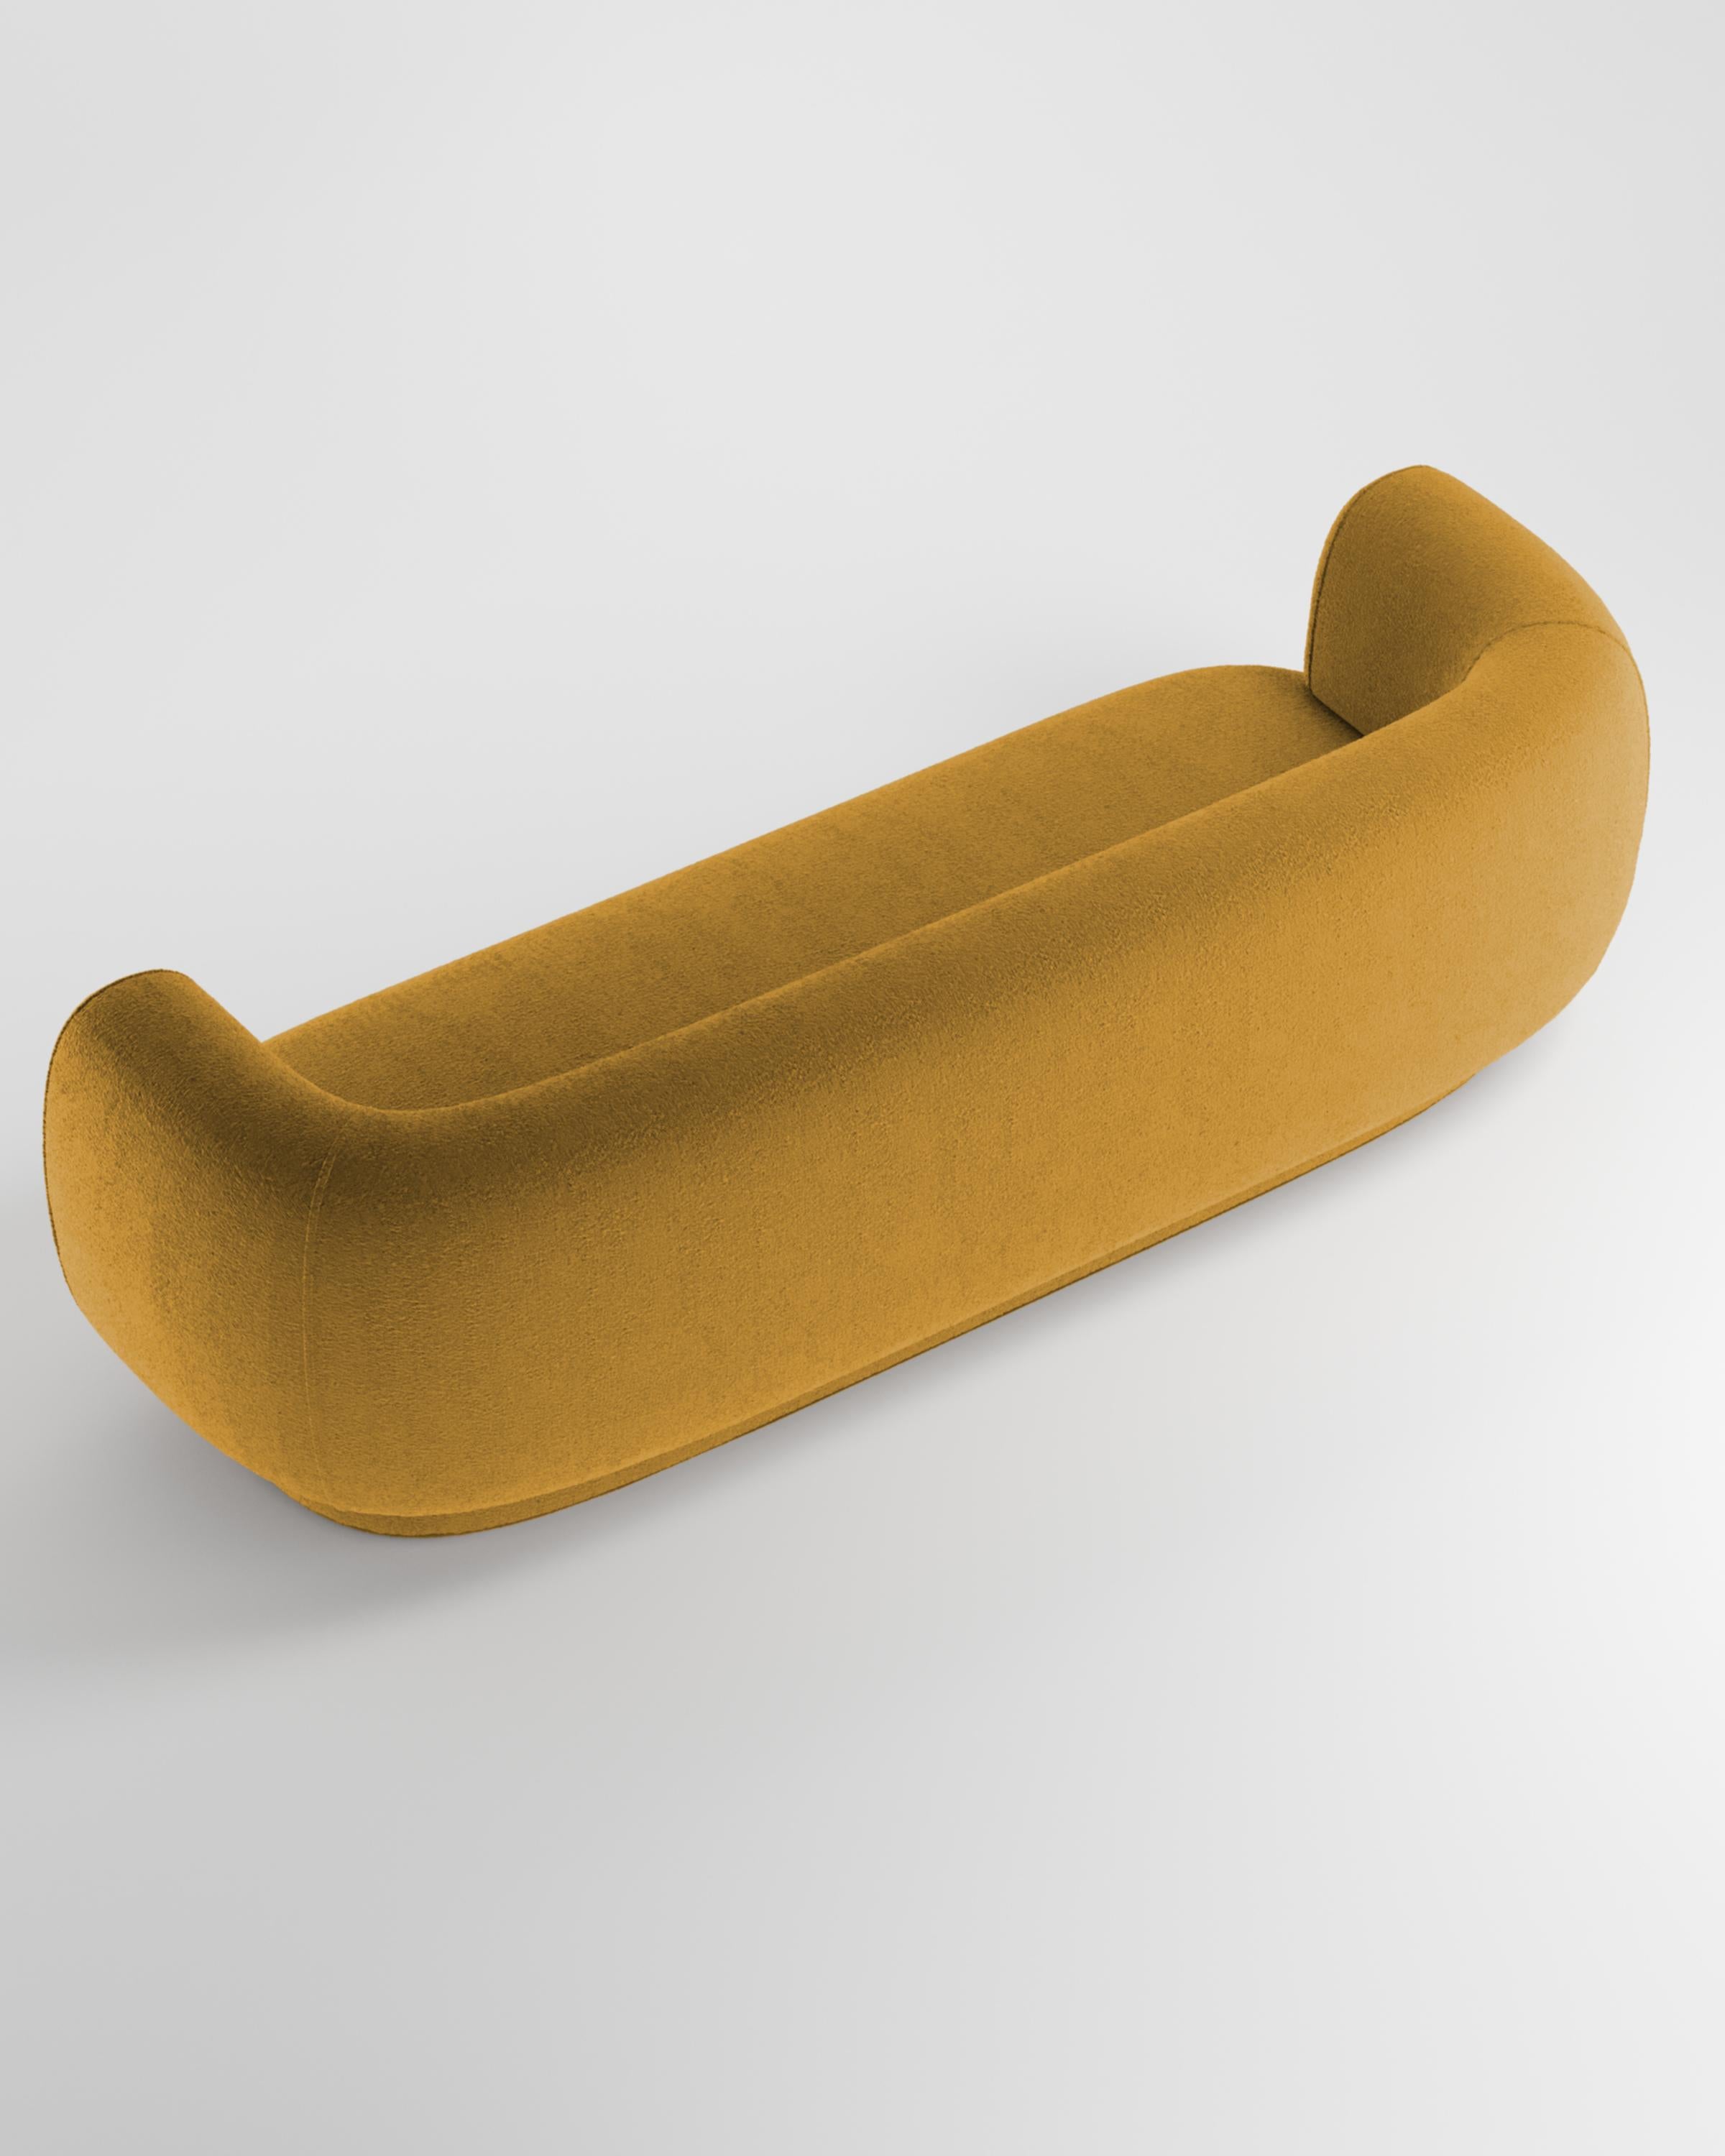 Hug sofa is defined by clean, simple lines and a distinctive armrest detail.
The armrest, half overlapping the seat cushion, creates an interlocking detail between the two elements, while the padding, firm and welcoming at the same time,